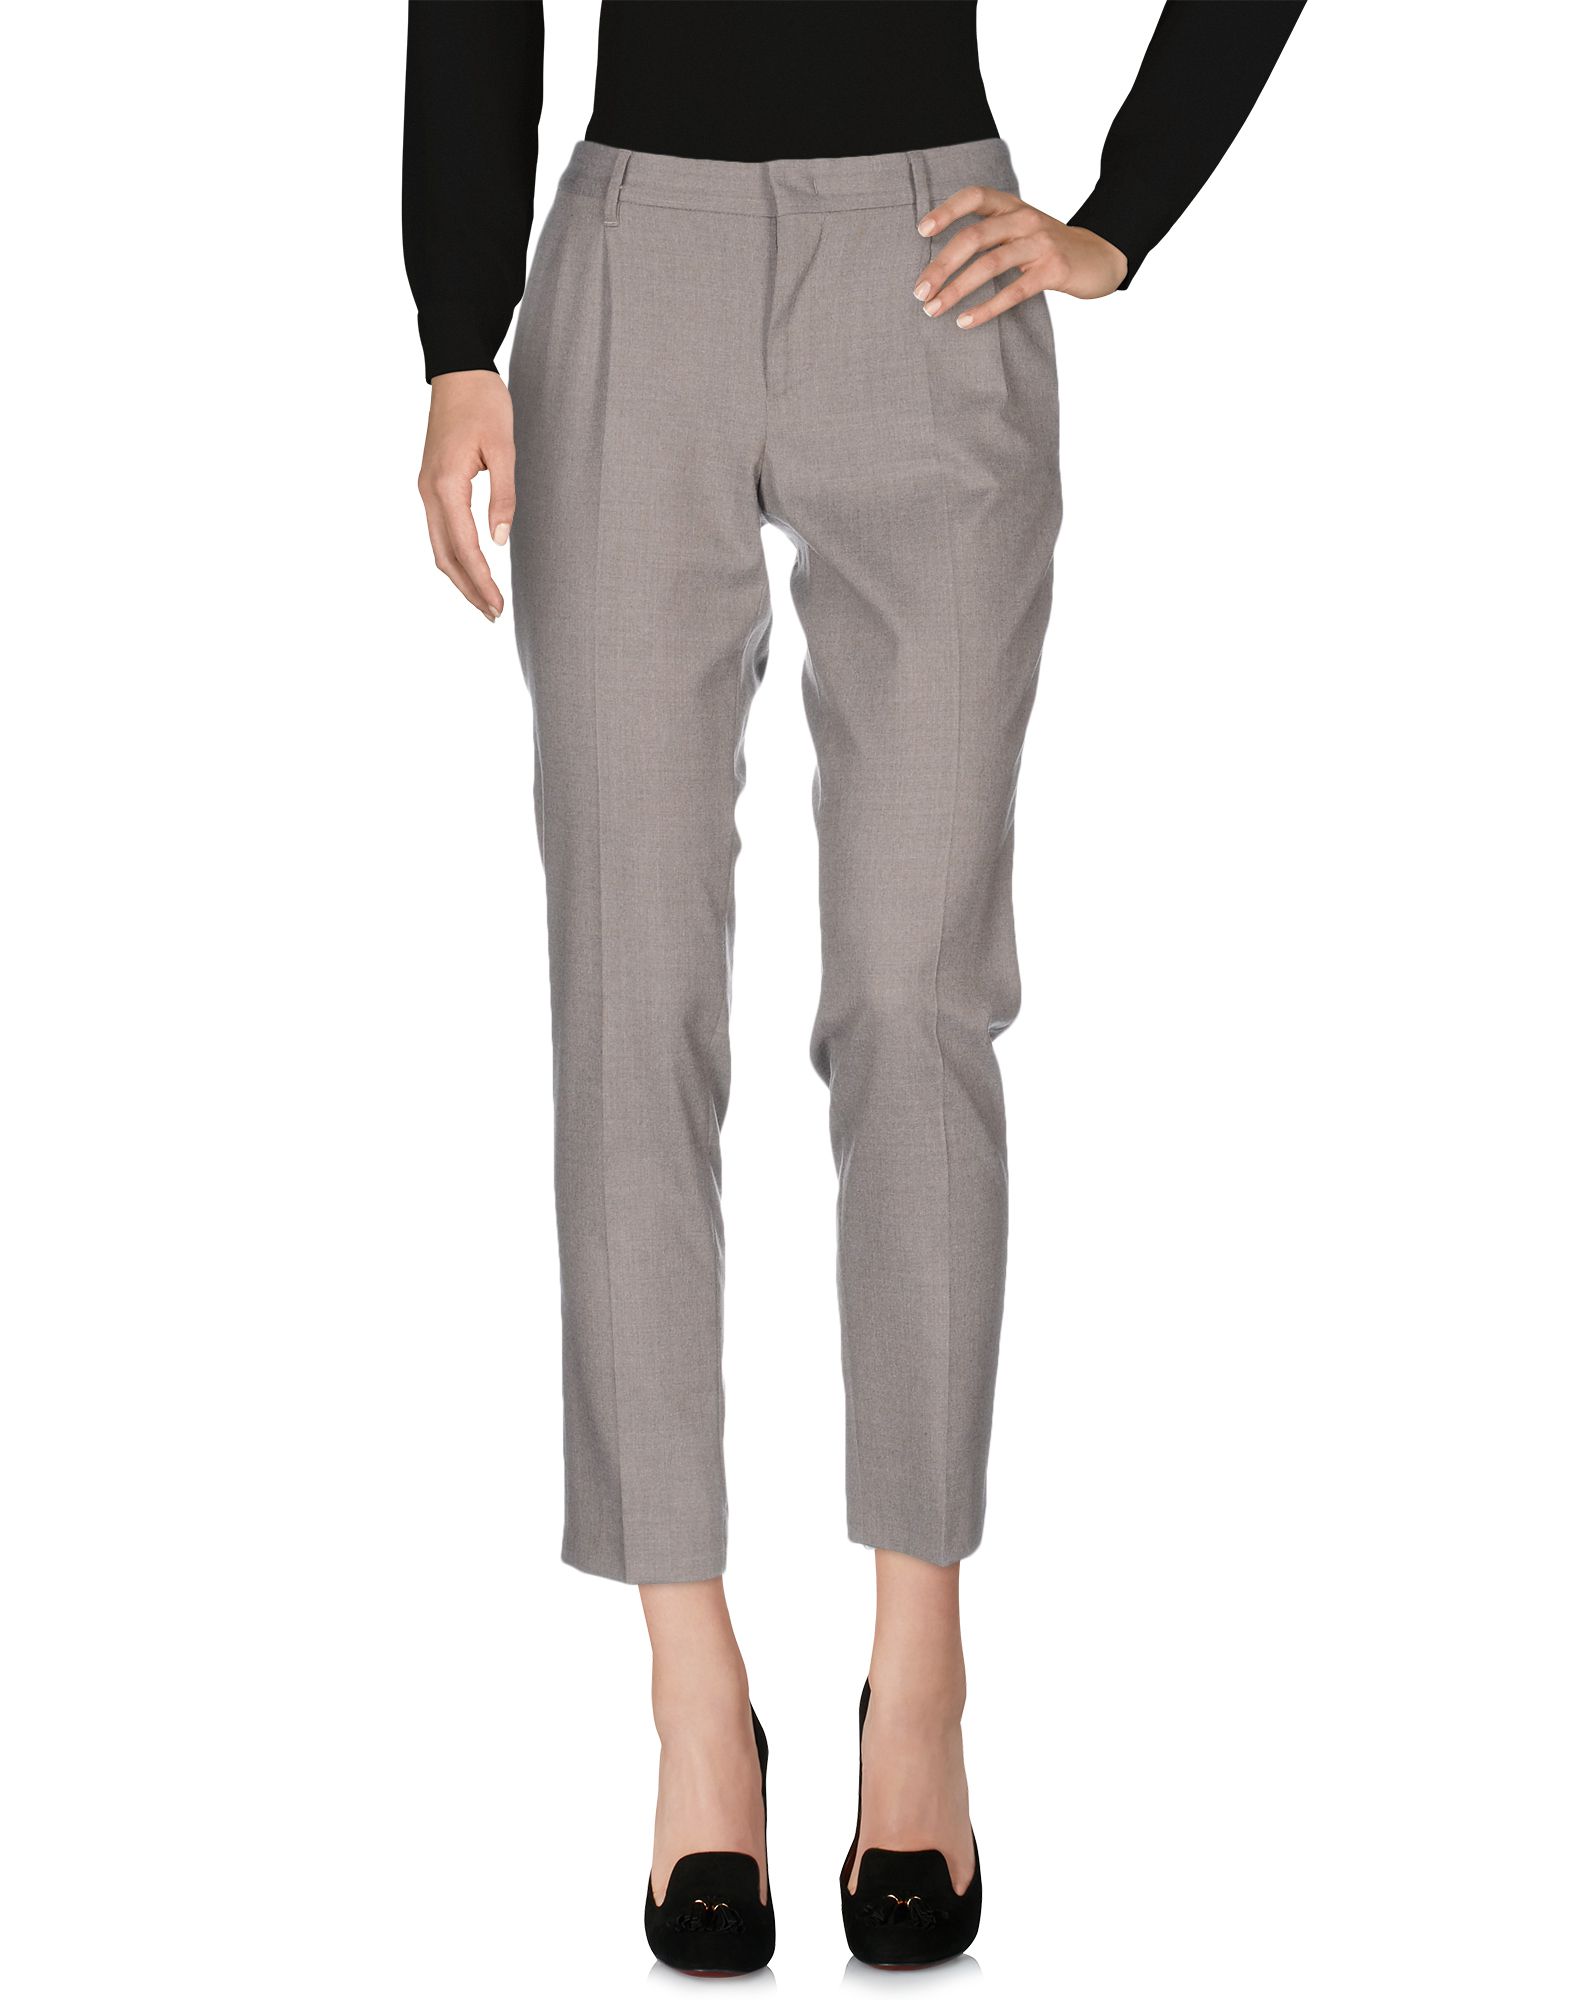 Pt0w Casual Pants In Dove Grey